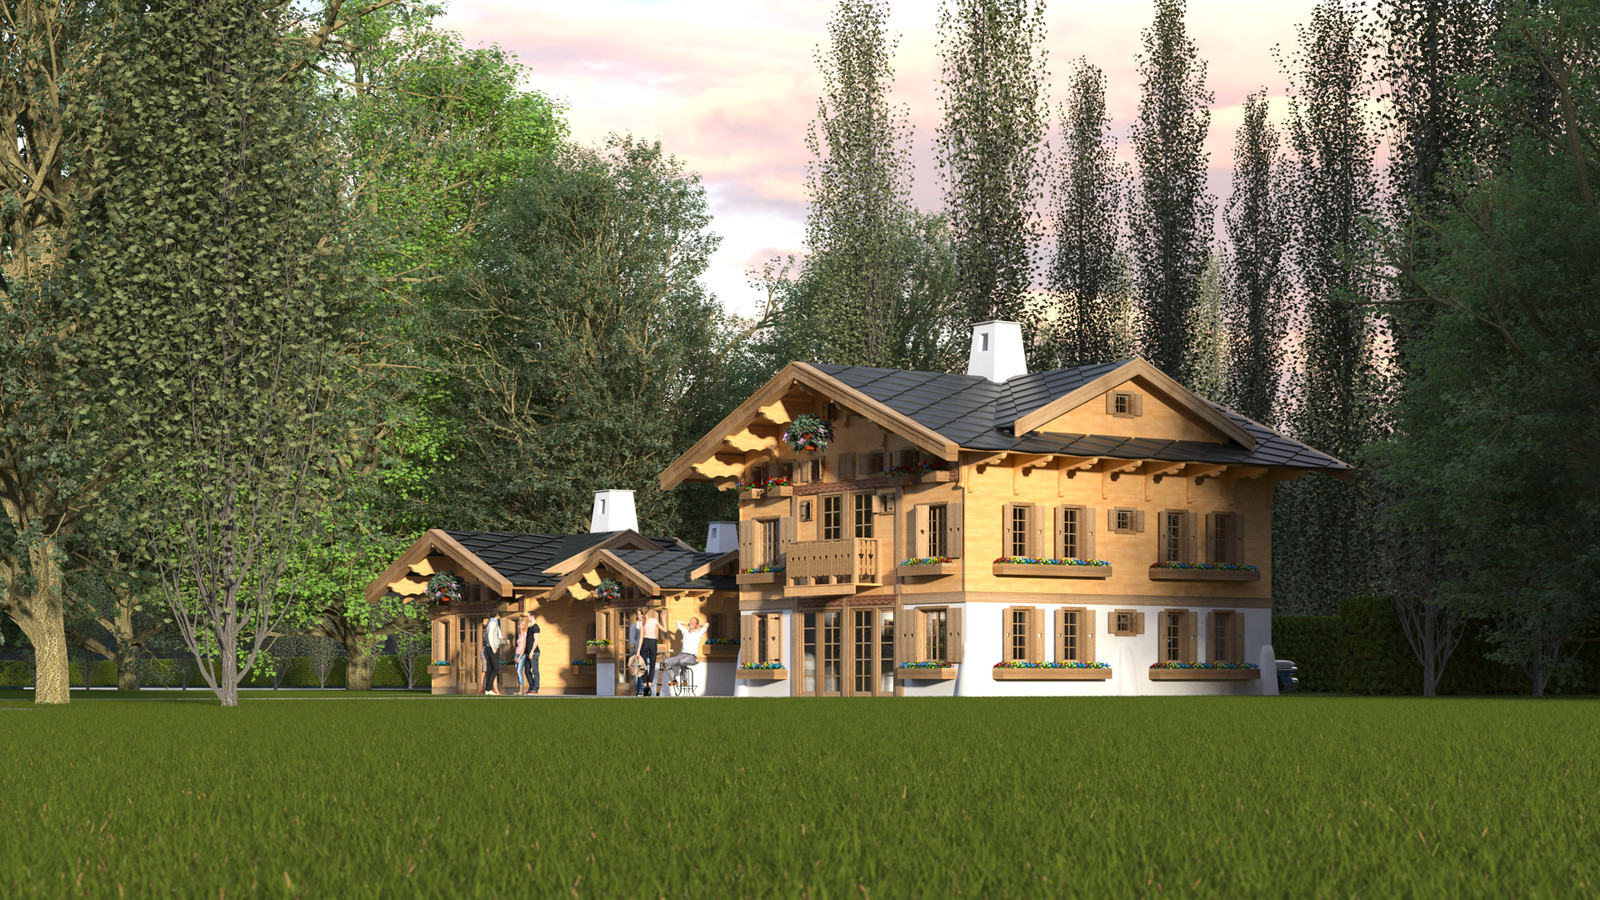 Sketchup 2018 + Thea Render 
This one is just for fun testing Thea 
Chalet large-Scene 6 B 252 hdr

HDR by HDRI-SKIES​ found here: http://hdri-skies.com/shop/hdri-sky-252/